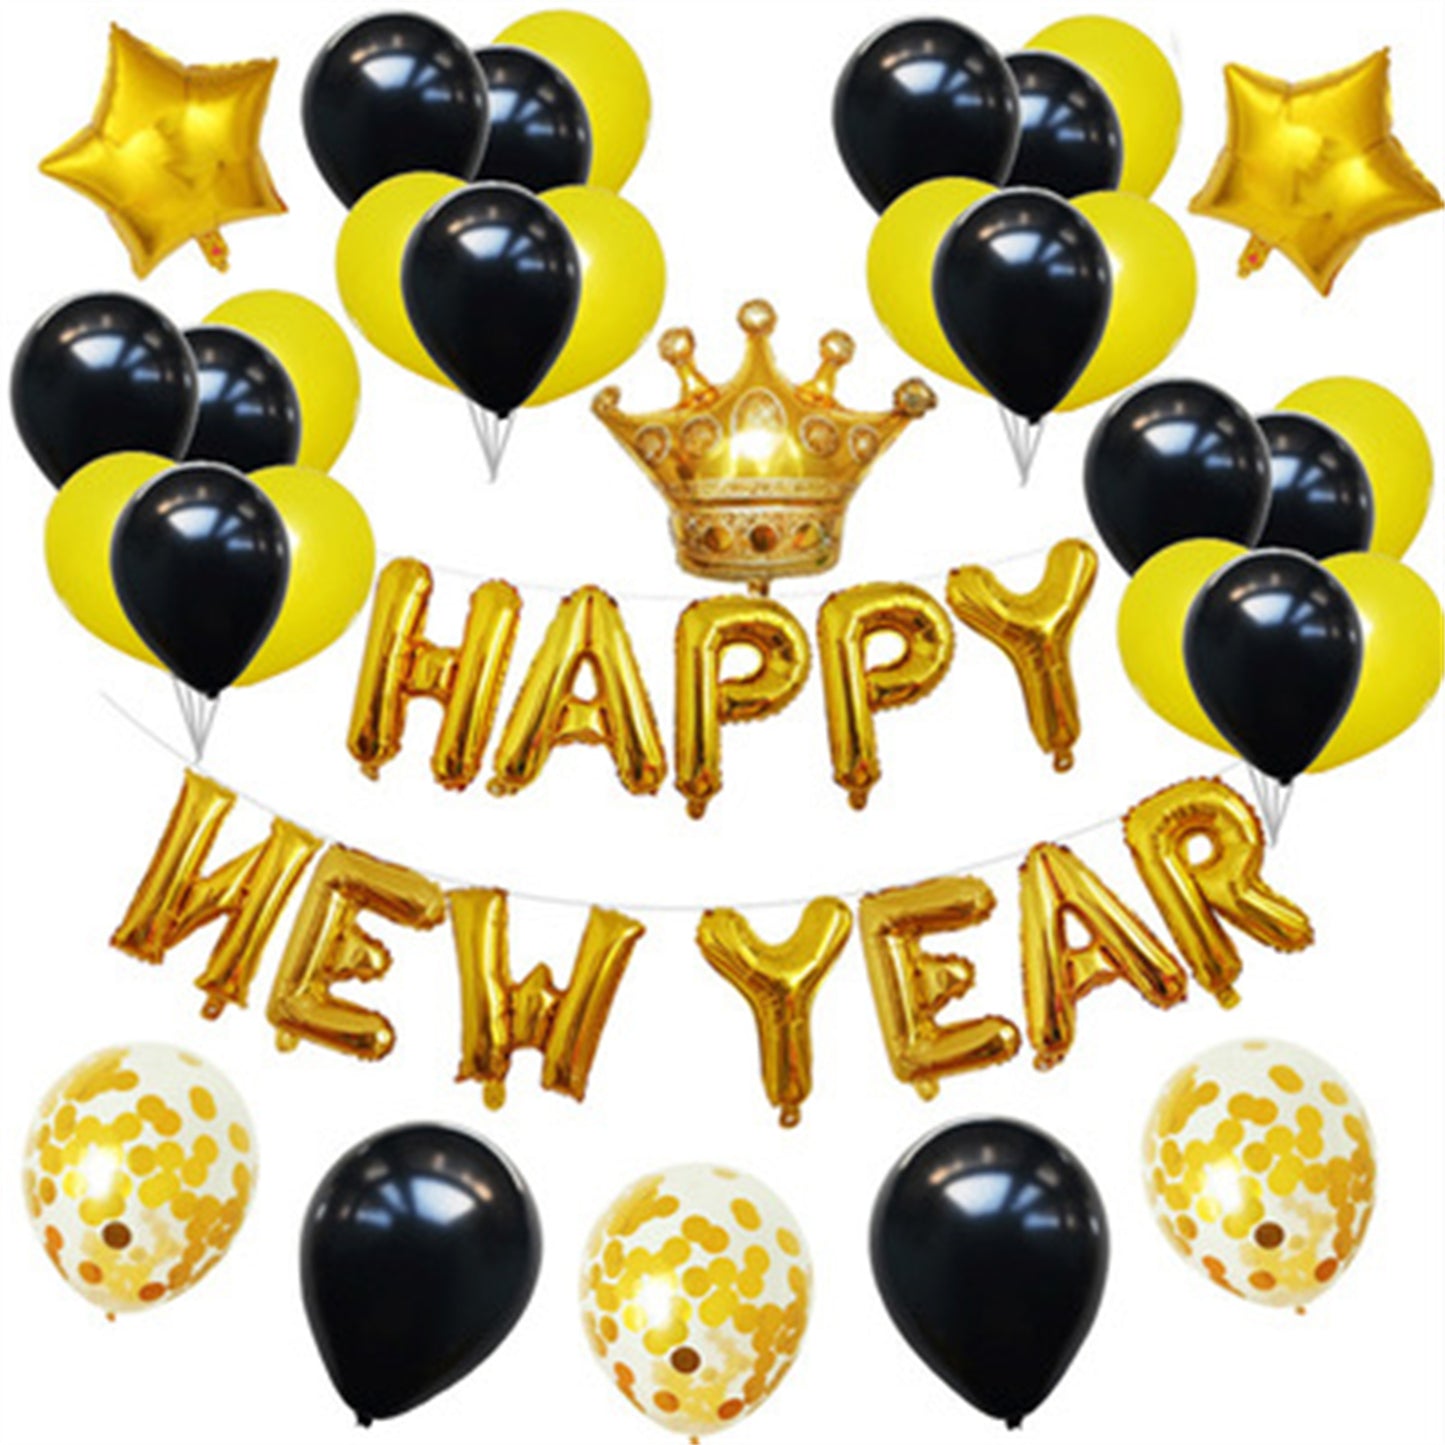 New Year celebration letters Happy New Year aluminum balloon set new year party decoration 16 inch balloon